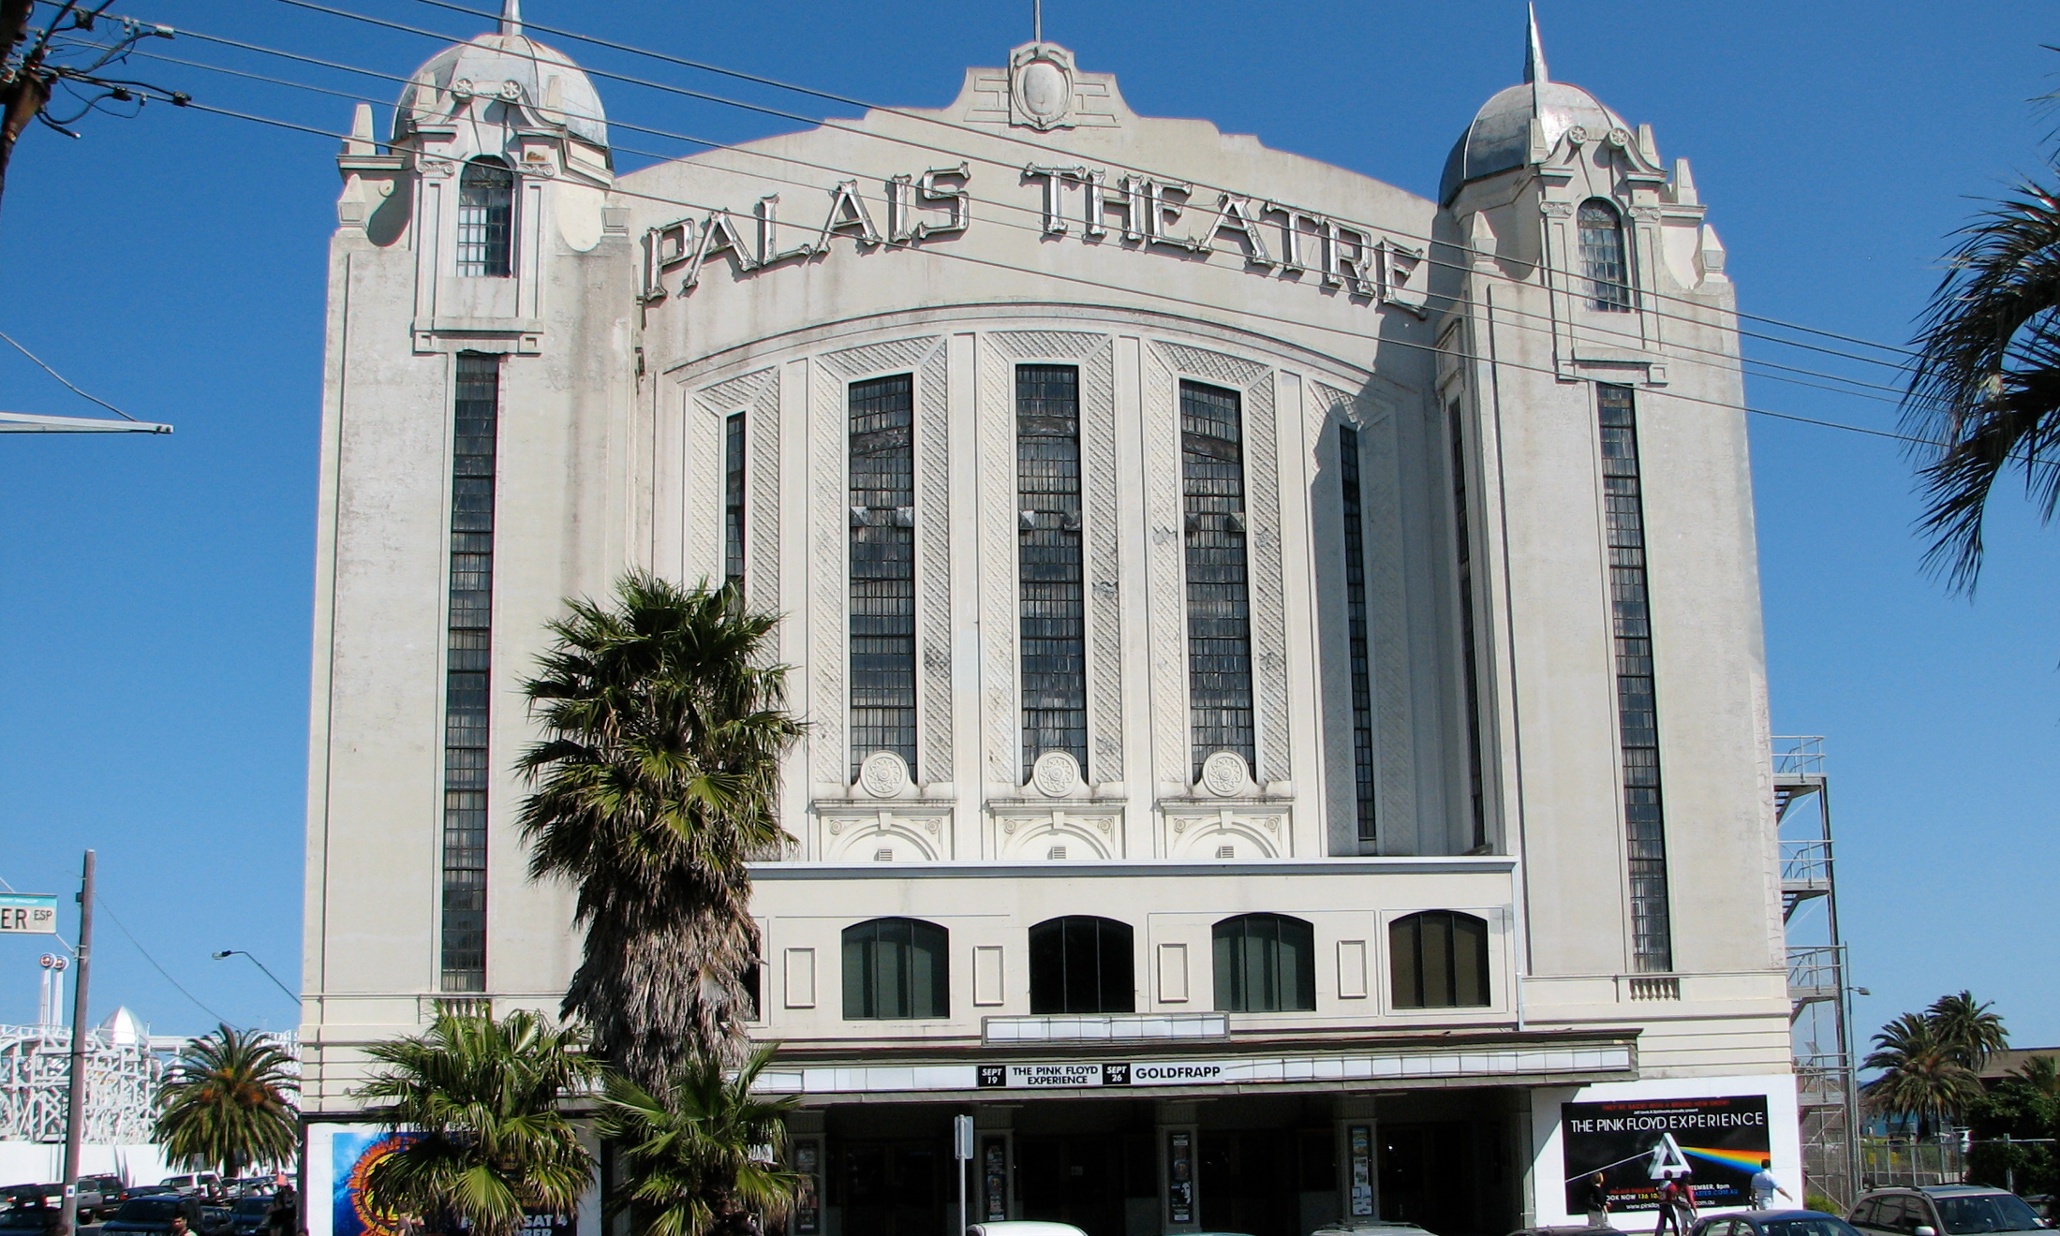 Live Nation could take over The Palais tomorrow